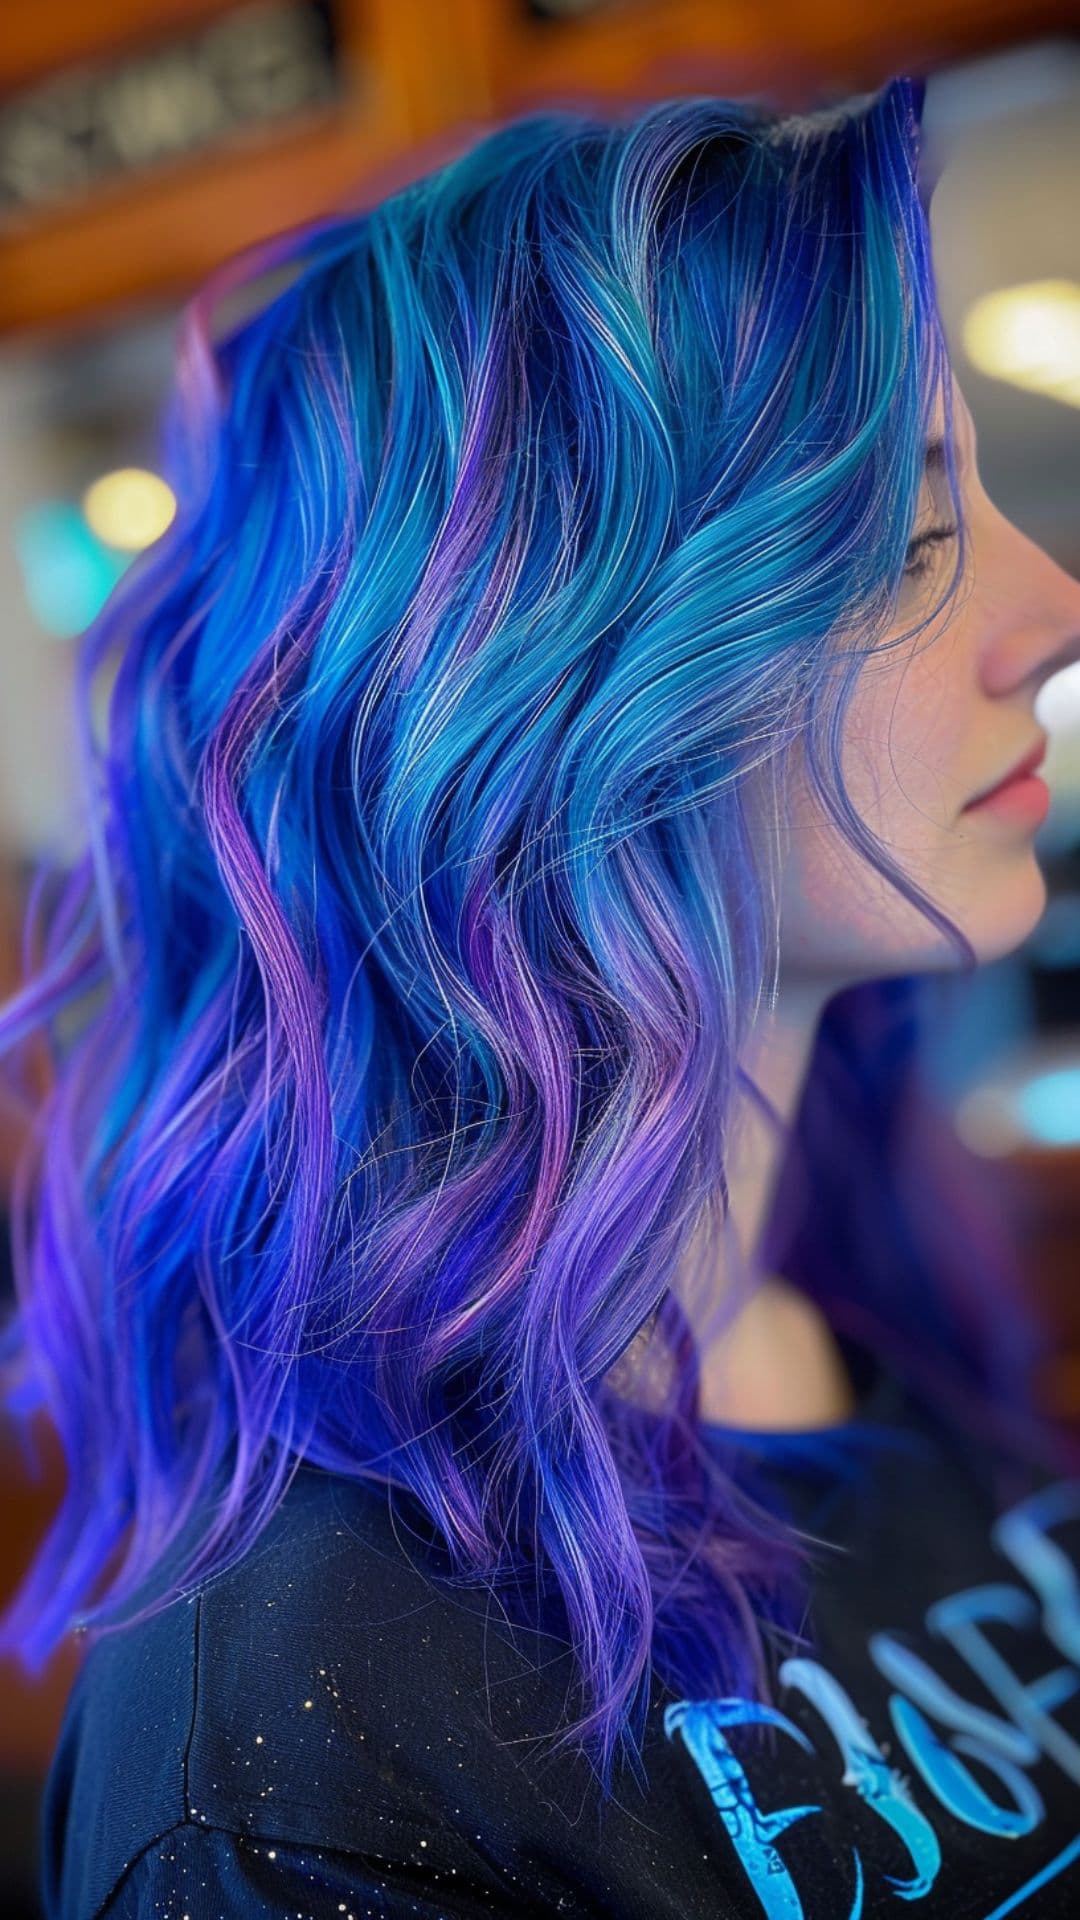 A woman modelling a blue and purple hair.